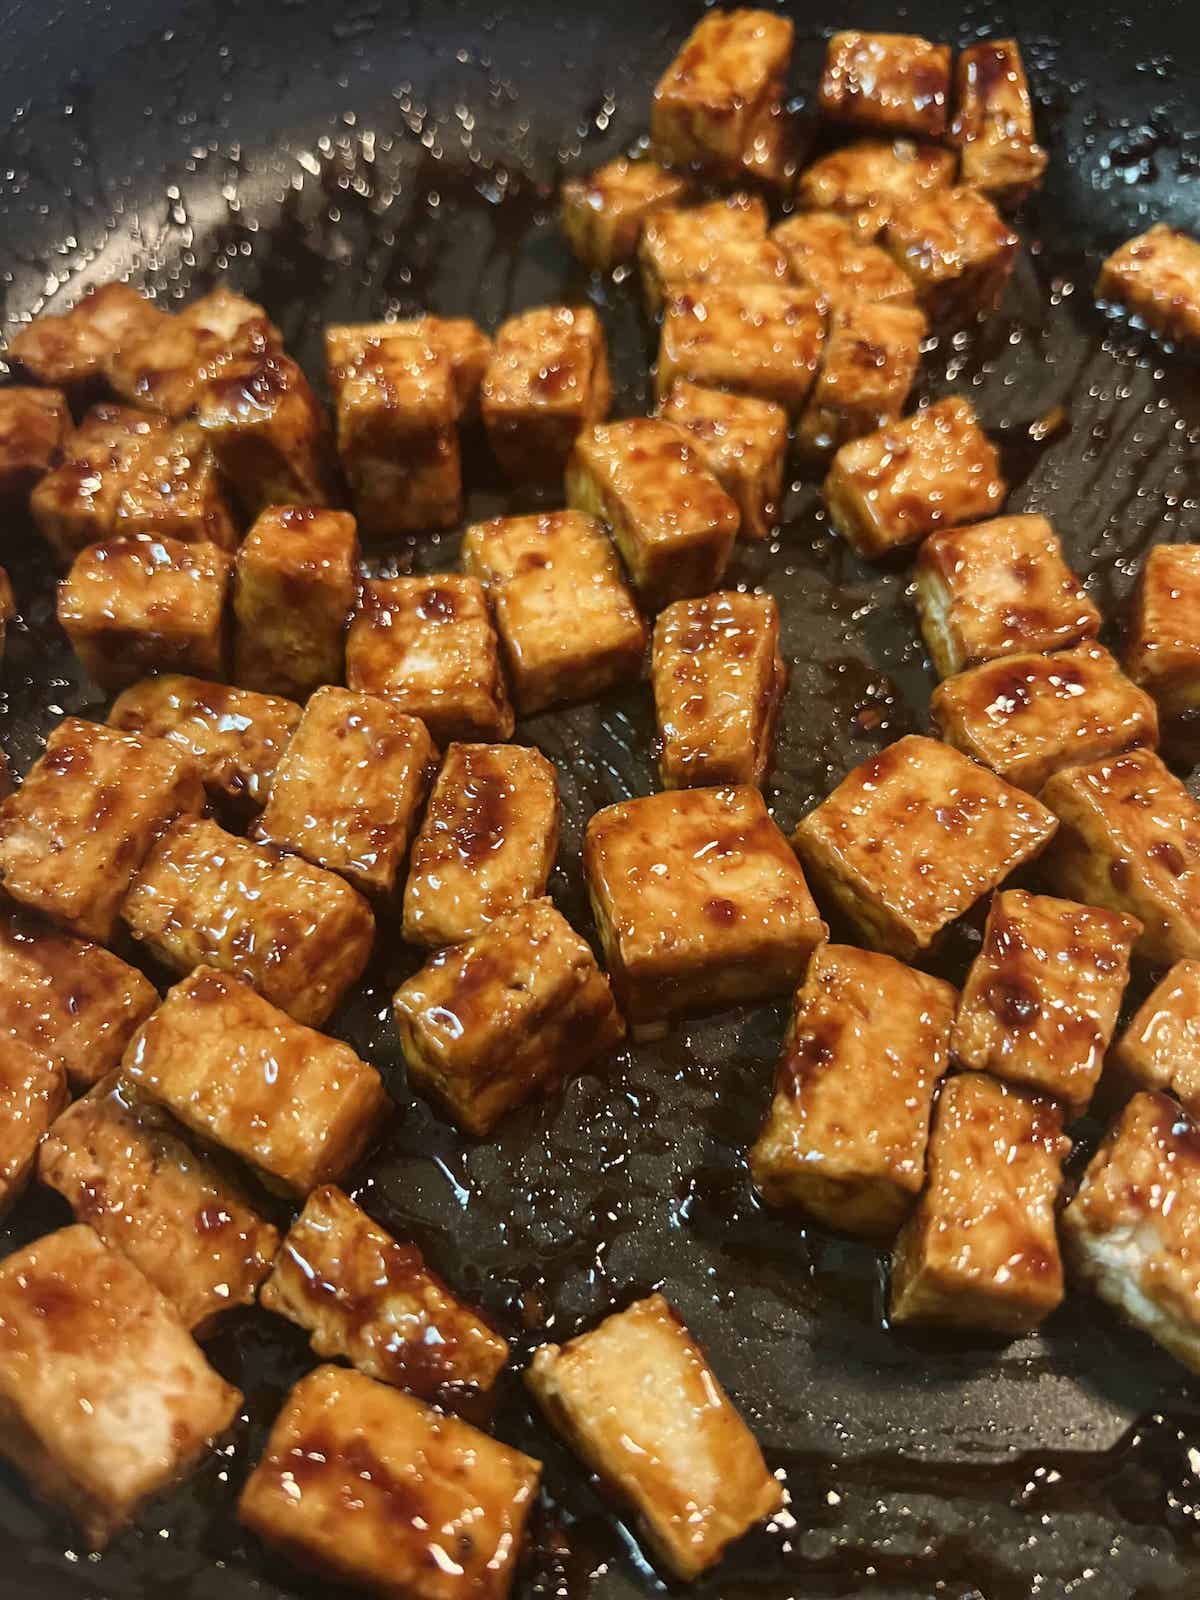 This is a photo of sticky tofu in sauce on the stove.